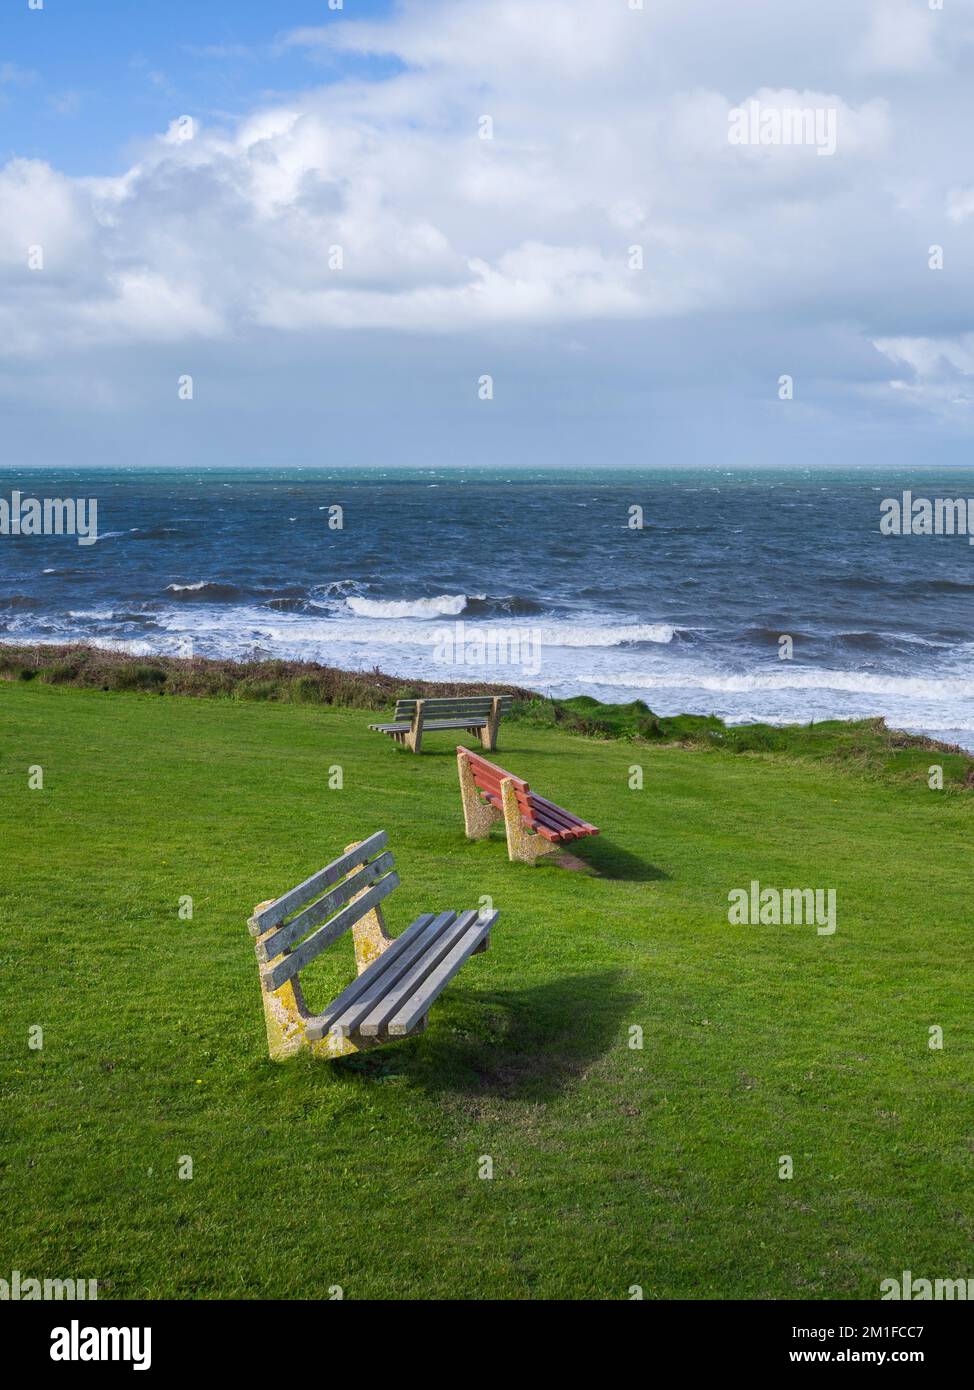 Benches overlooking Barnstable Bay on the green at Westward Ho! on the North Devon coast, England. Stock Photo